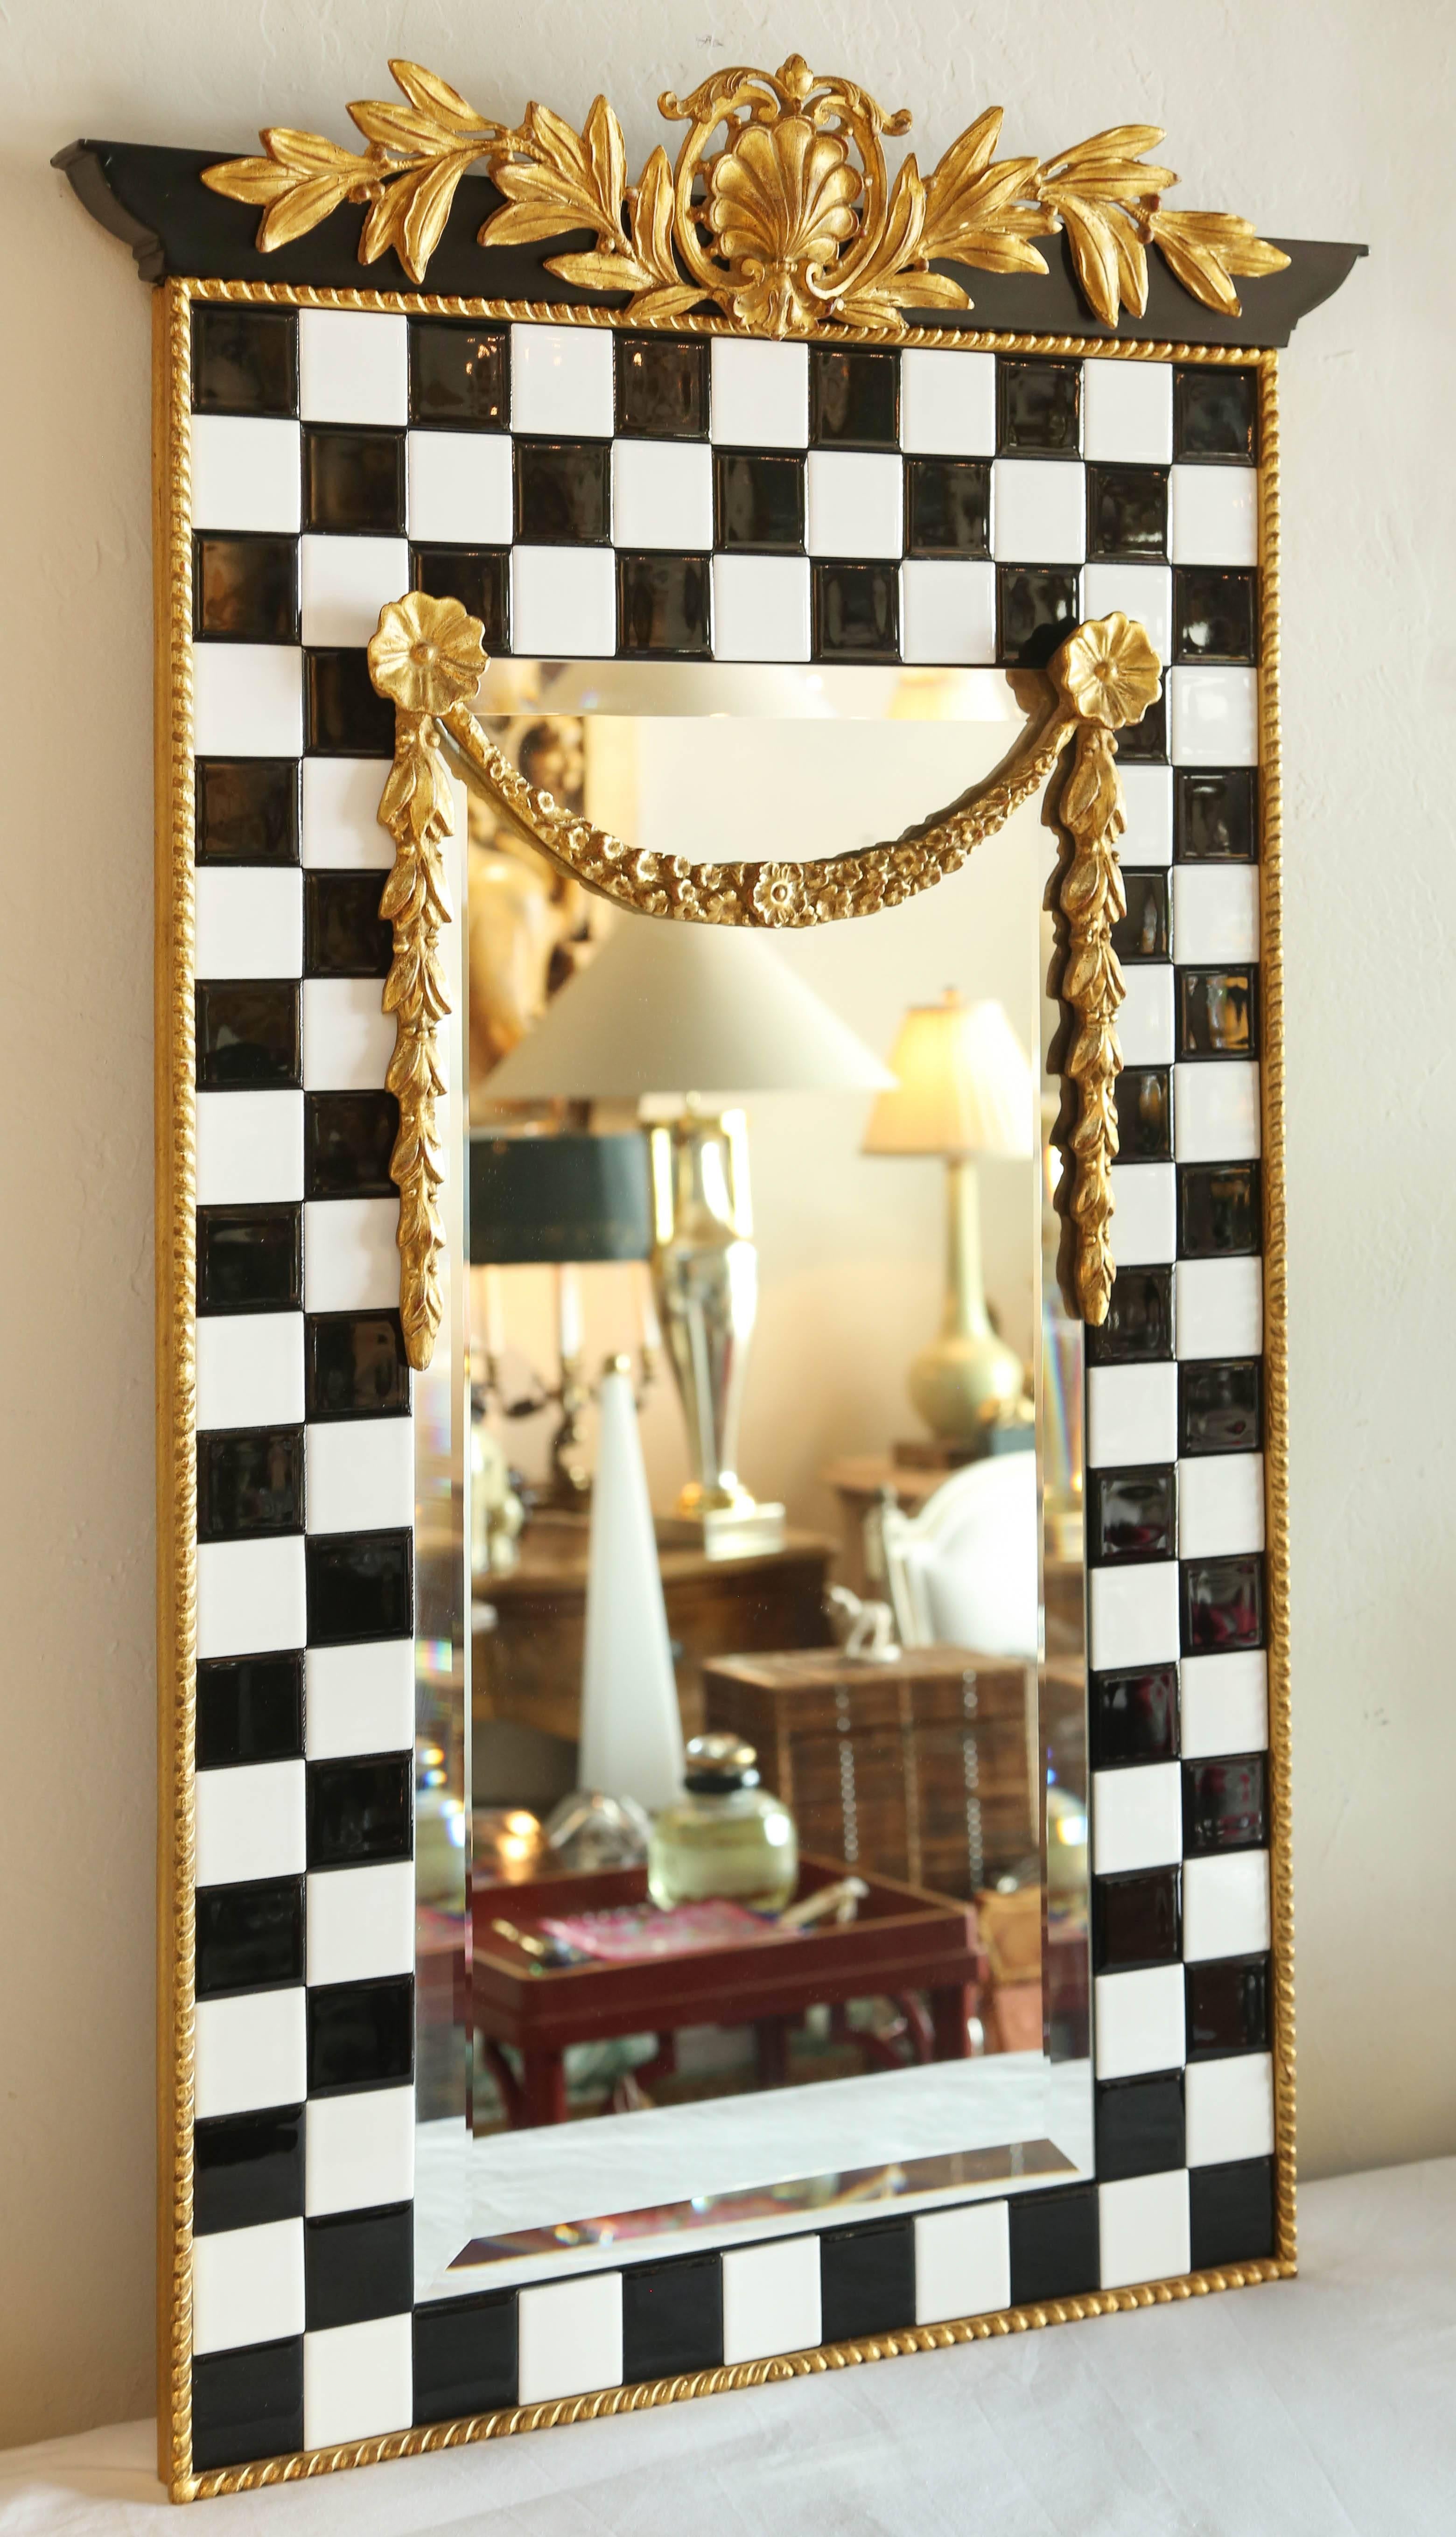 Black and white tiled mirror frame with carved and gilded accents at top and middle.